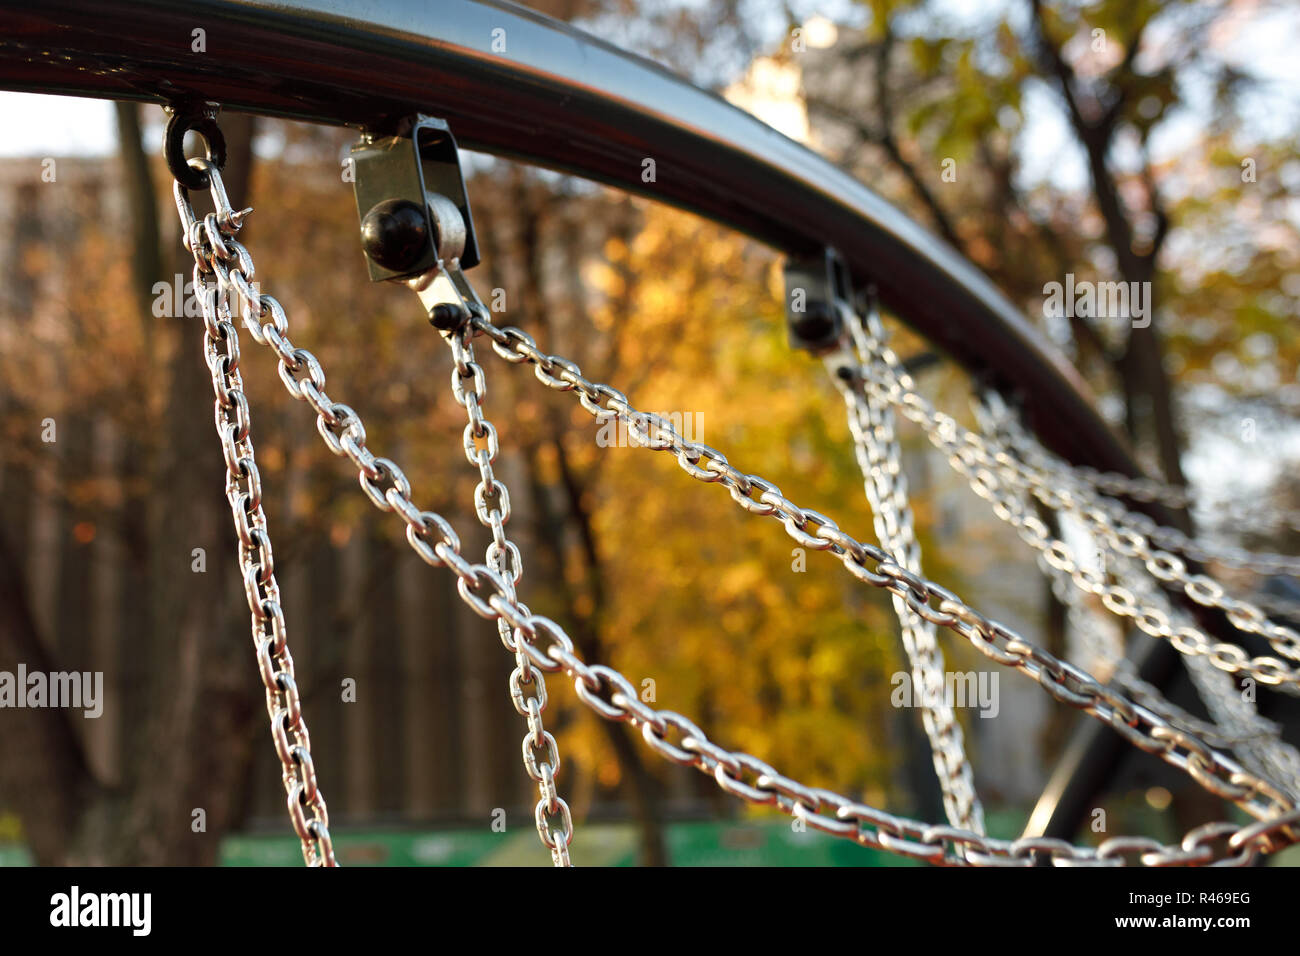 metal chain swing. Chains and poles that hold the swings together Stock Photo